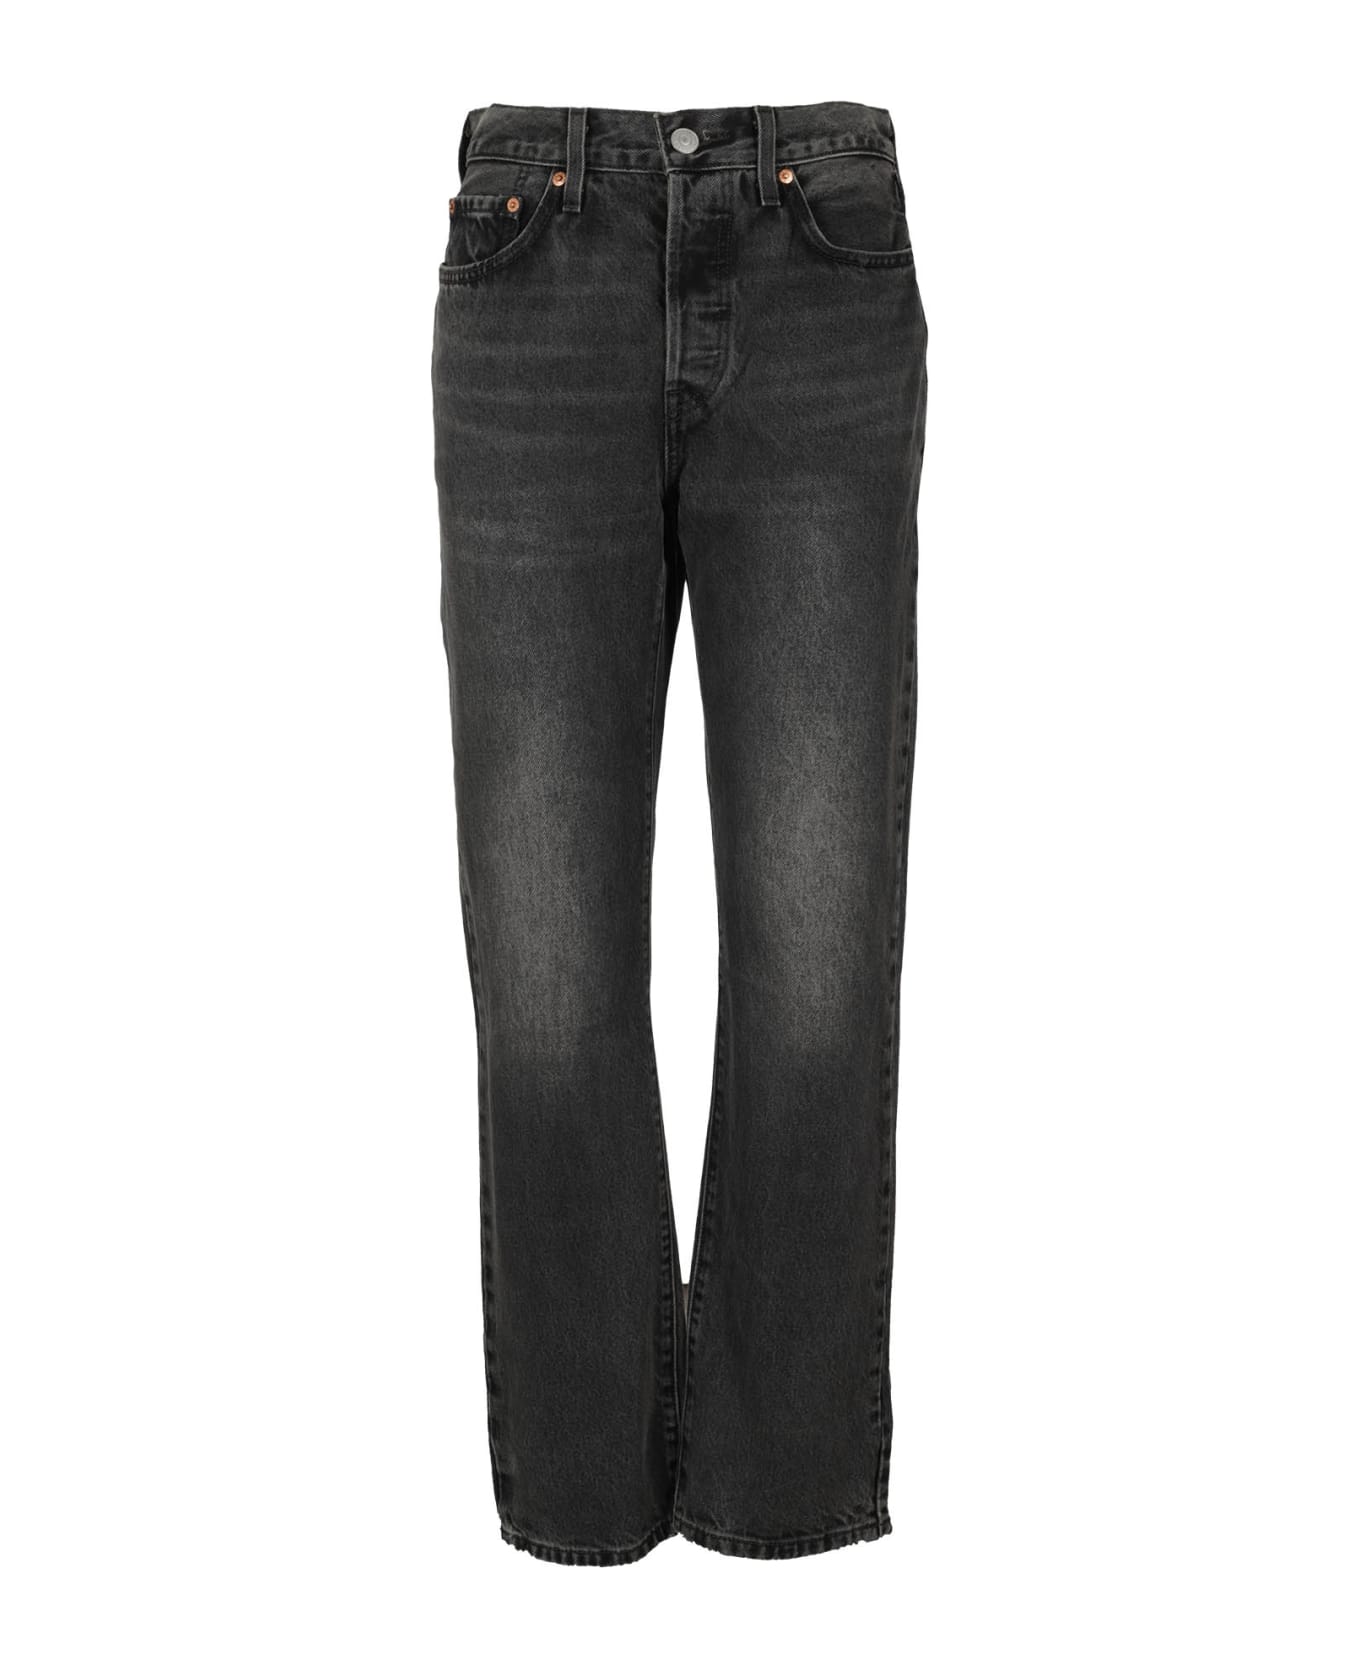 Levi's 501 Jeans For Women Take A Hint - Black